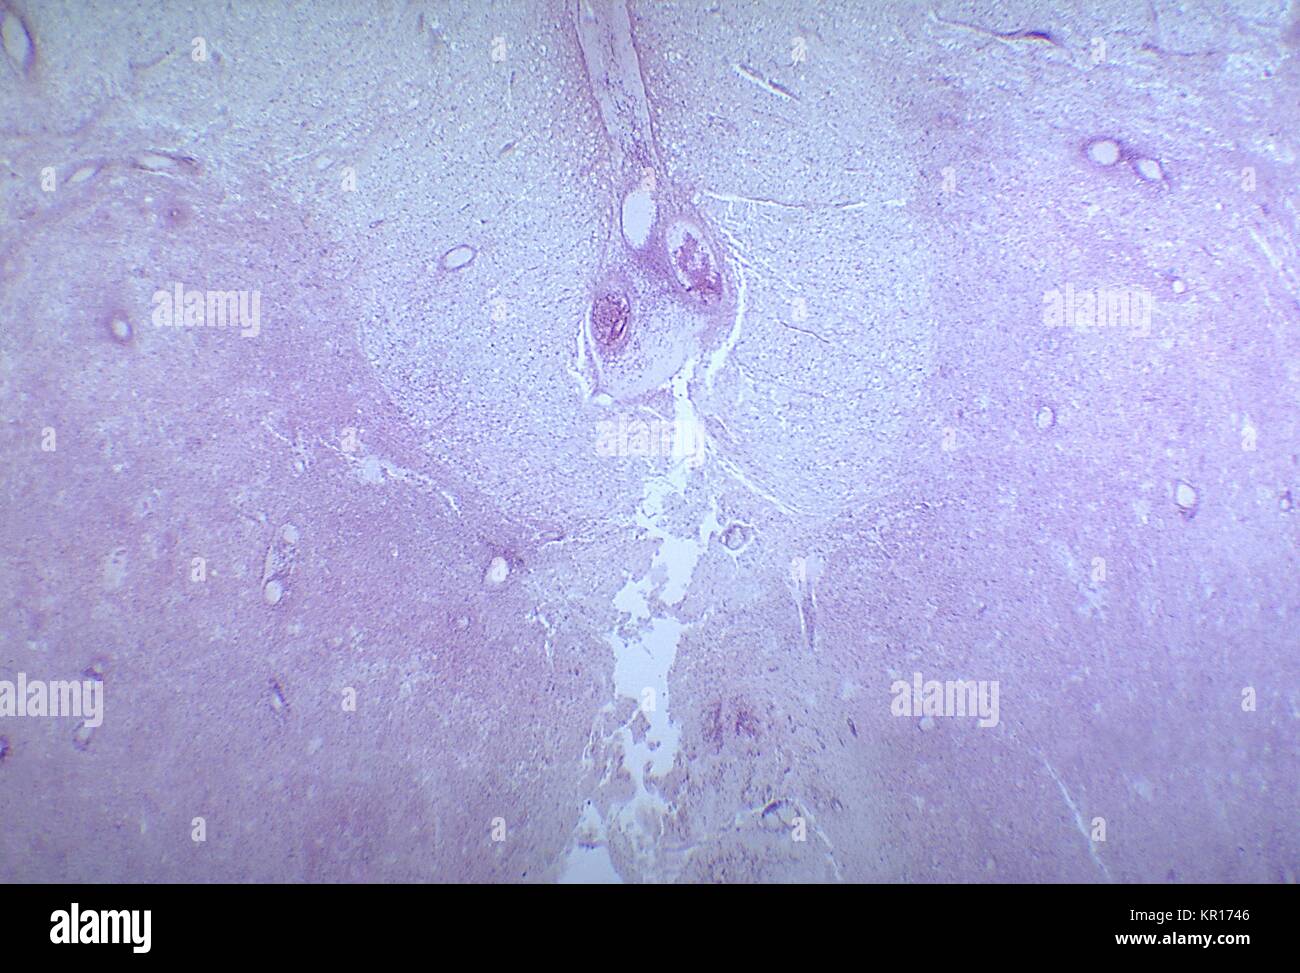 A photomicrograph of the lumbar spinal cord depicting degenerative changes due to an infarct caused by Polio Type III, 1964. When spinal neurons die, Wallerian degeneration takes place resulting in muscle weakness of those muscles once innervated by the now dead neurons (denervated). The degree of paralysis is directly correlated to the number of deceased neurons. Image courtesy CDC/Dr. Karp, Emory University. Stock Photo